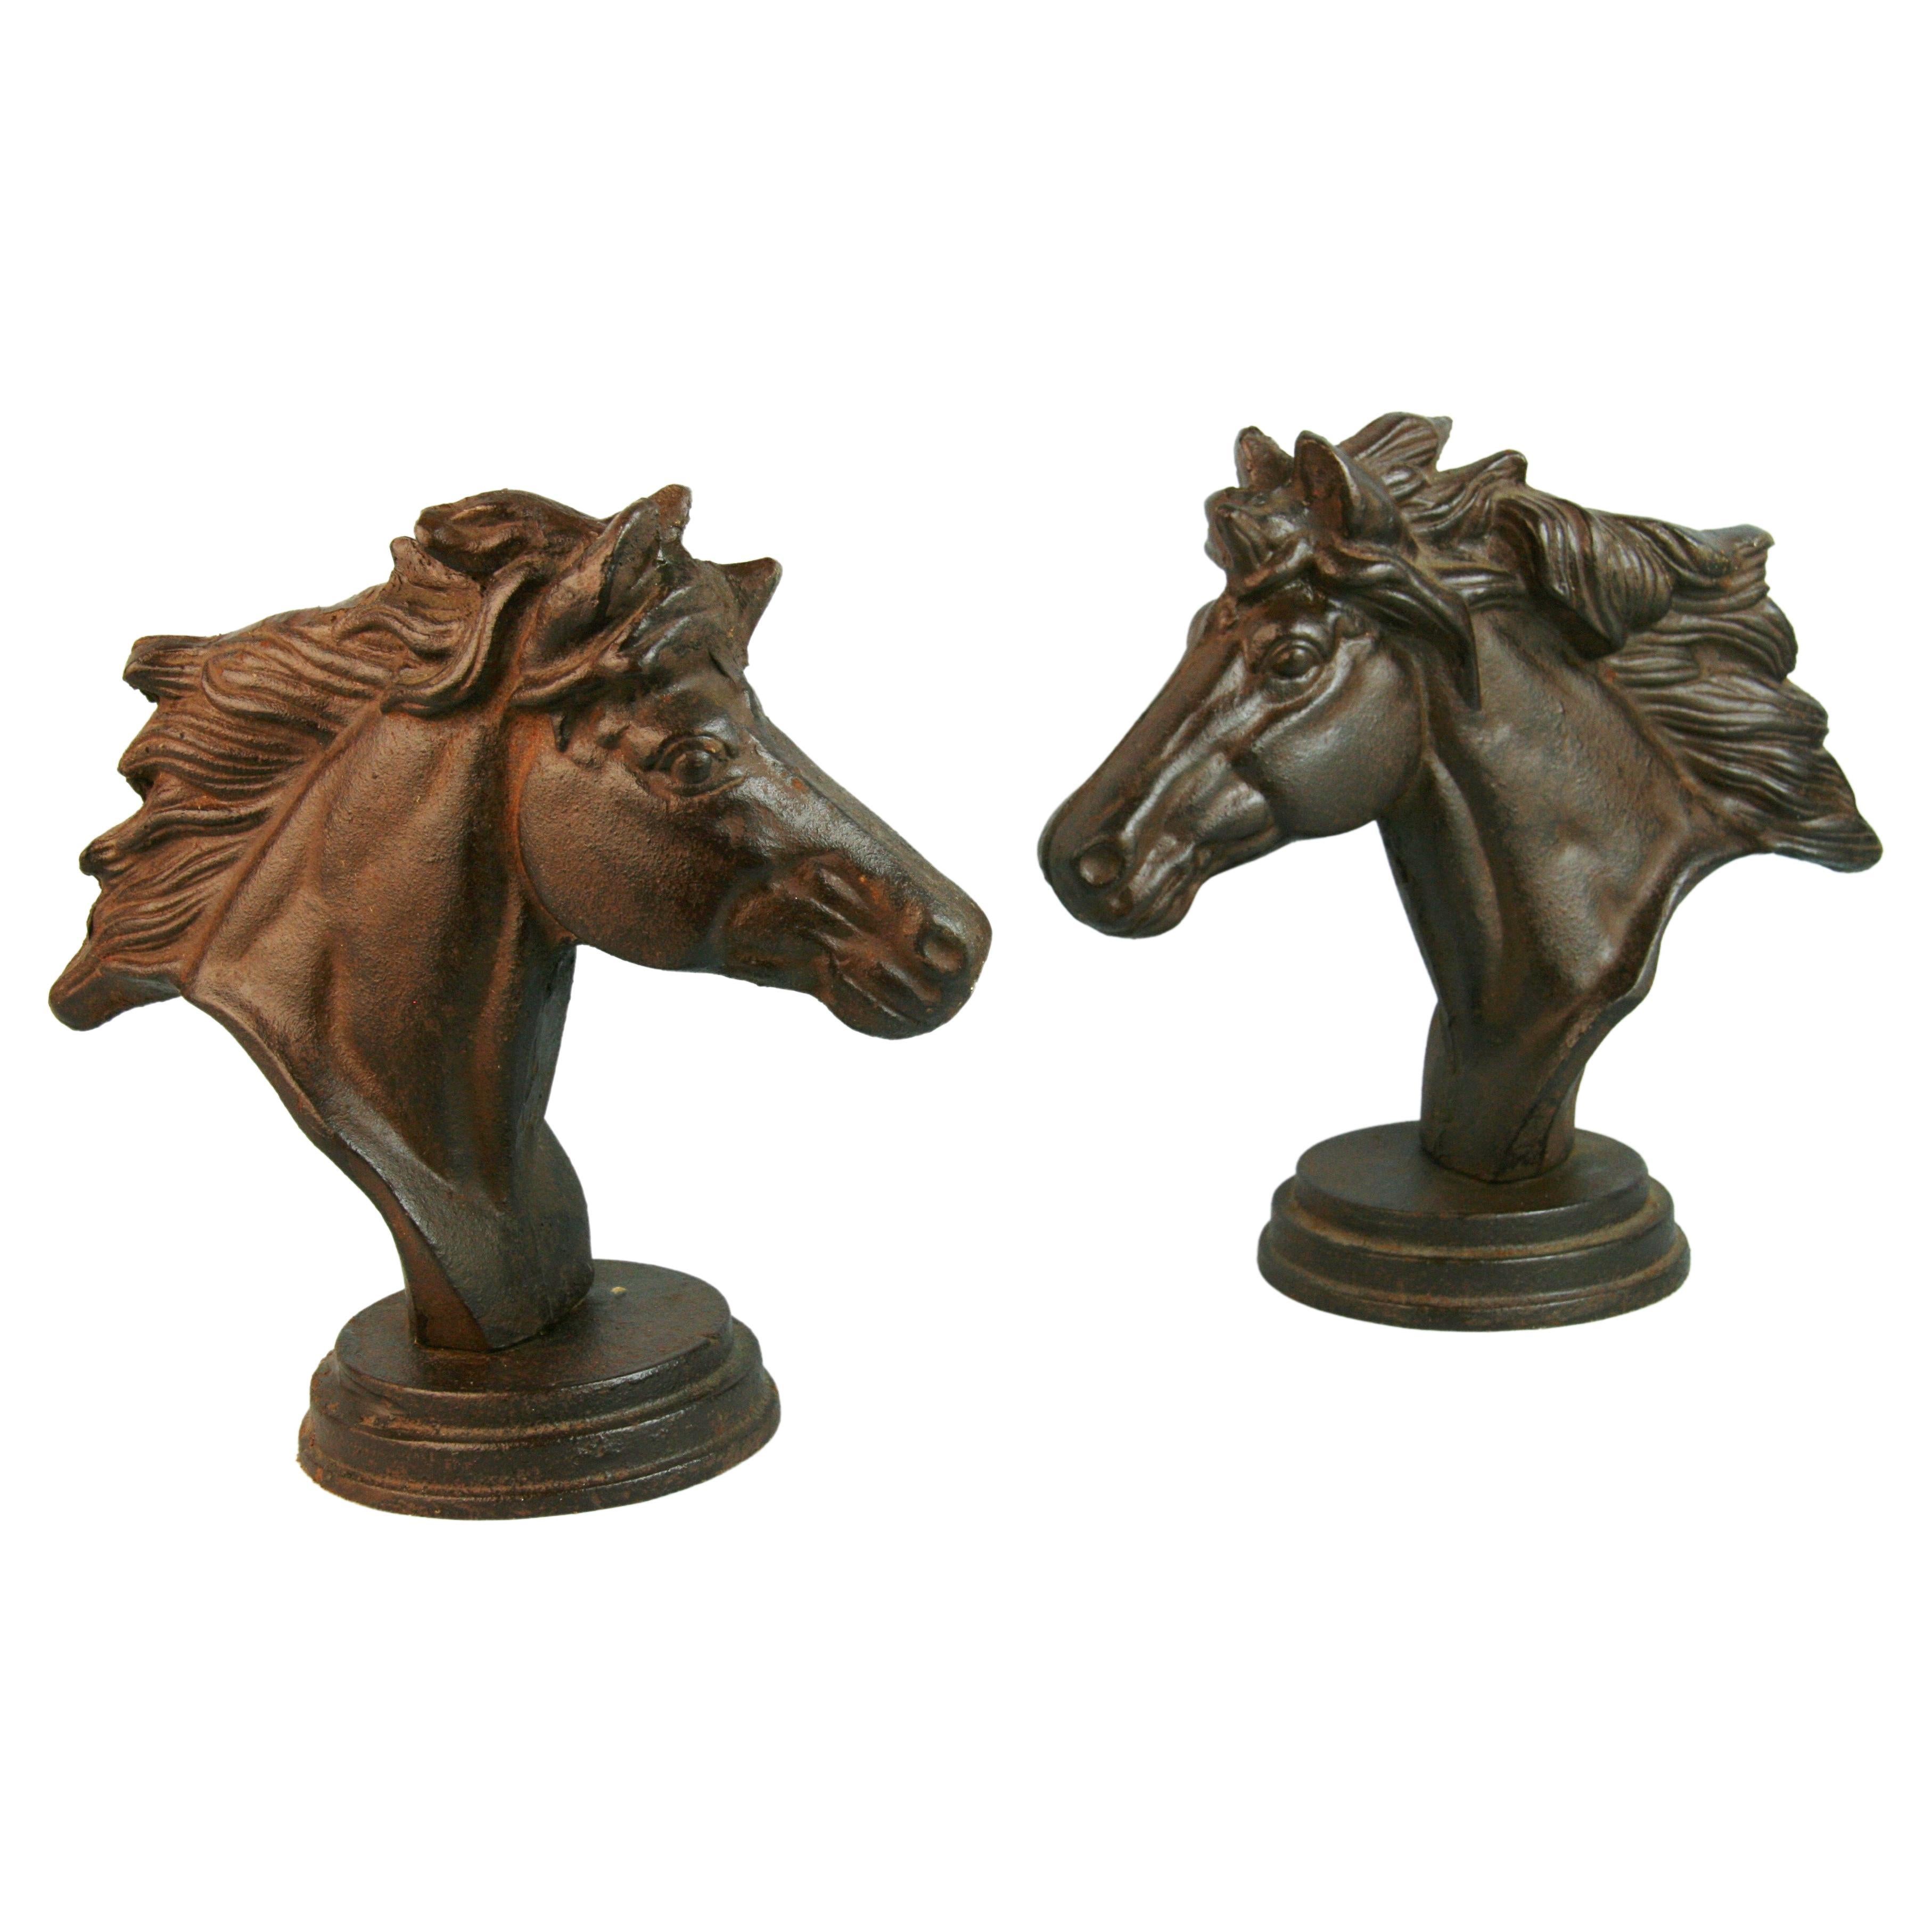 Rust Garden Ornament Animal Feature Cast Iron Galloping Horse Statue on Plinth 